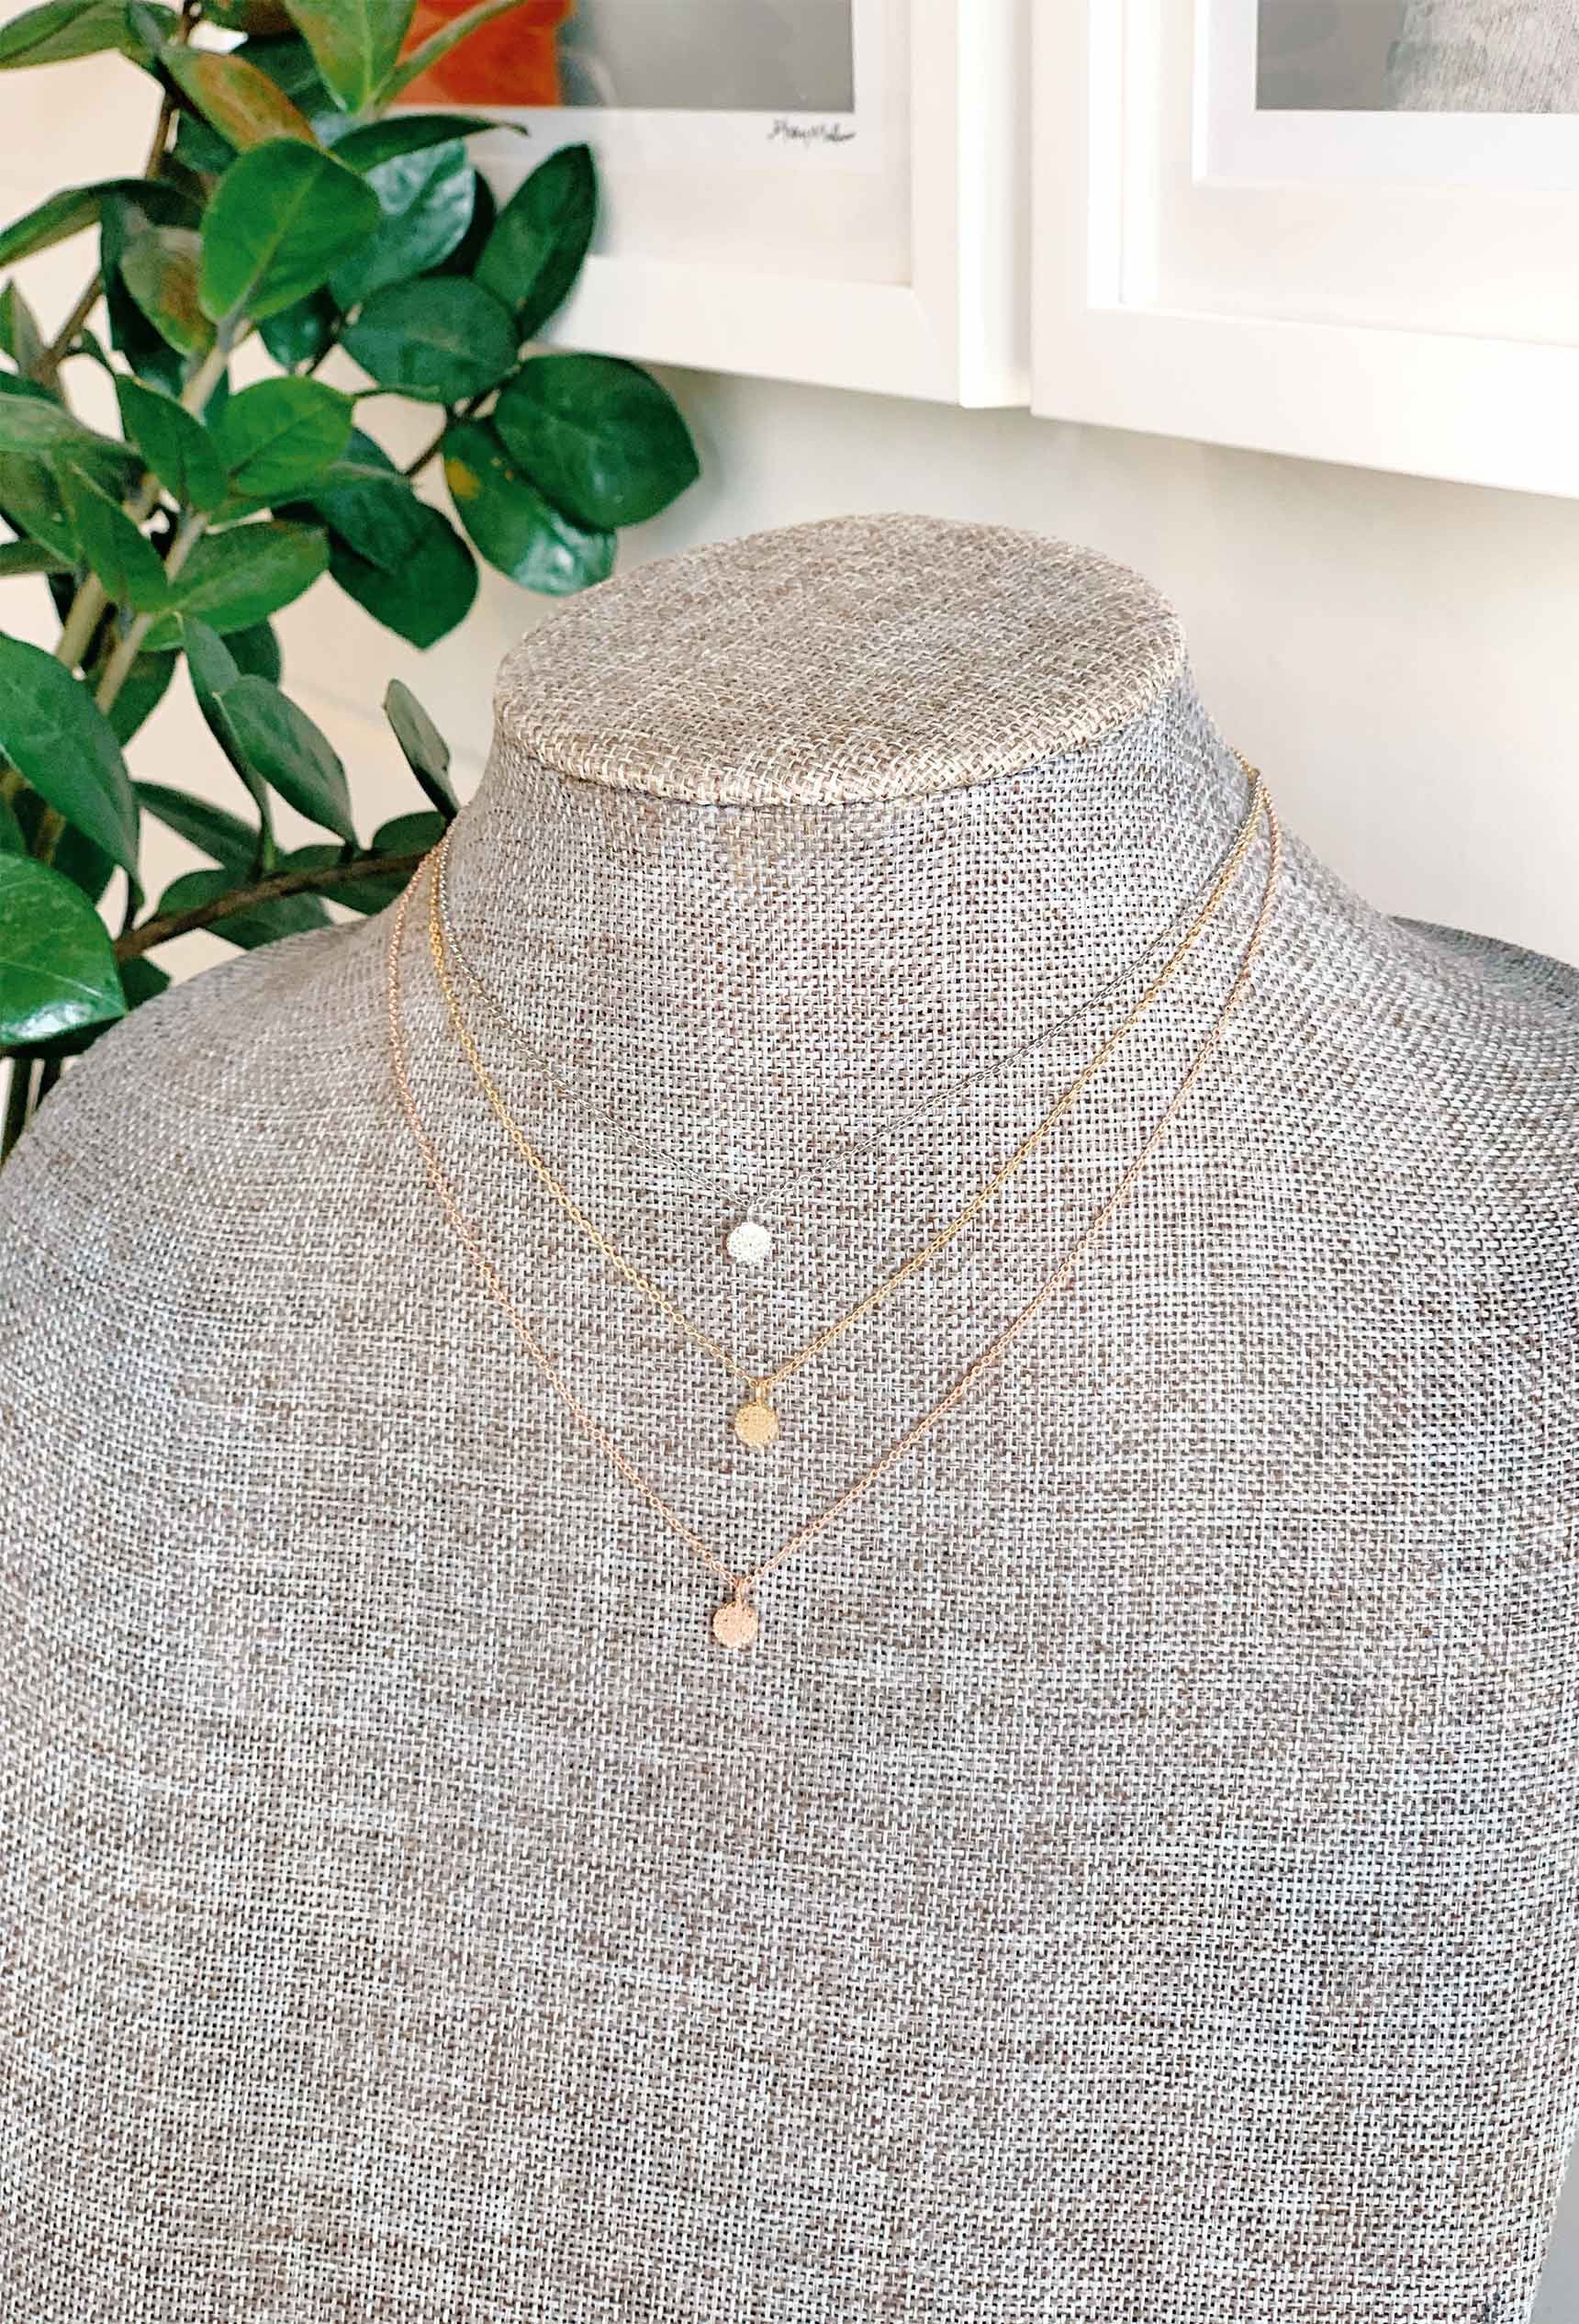 Circle Trio Necklace Set, silver rose gold and gold 3 piece necklace set with charms 